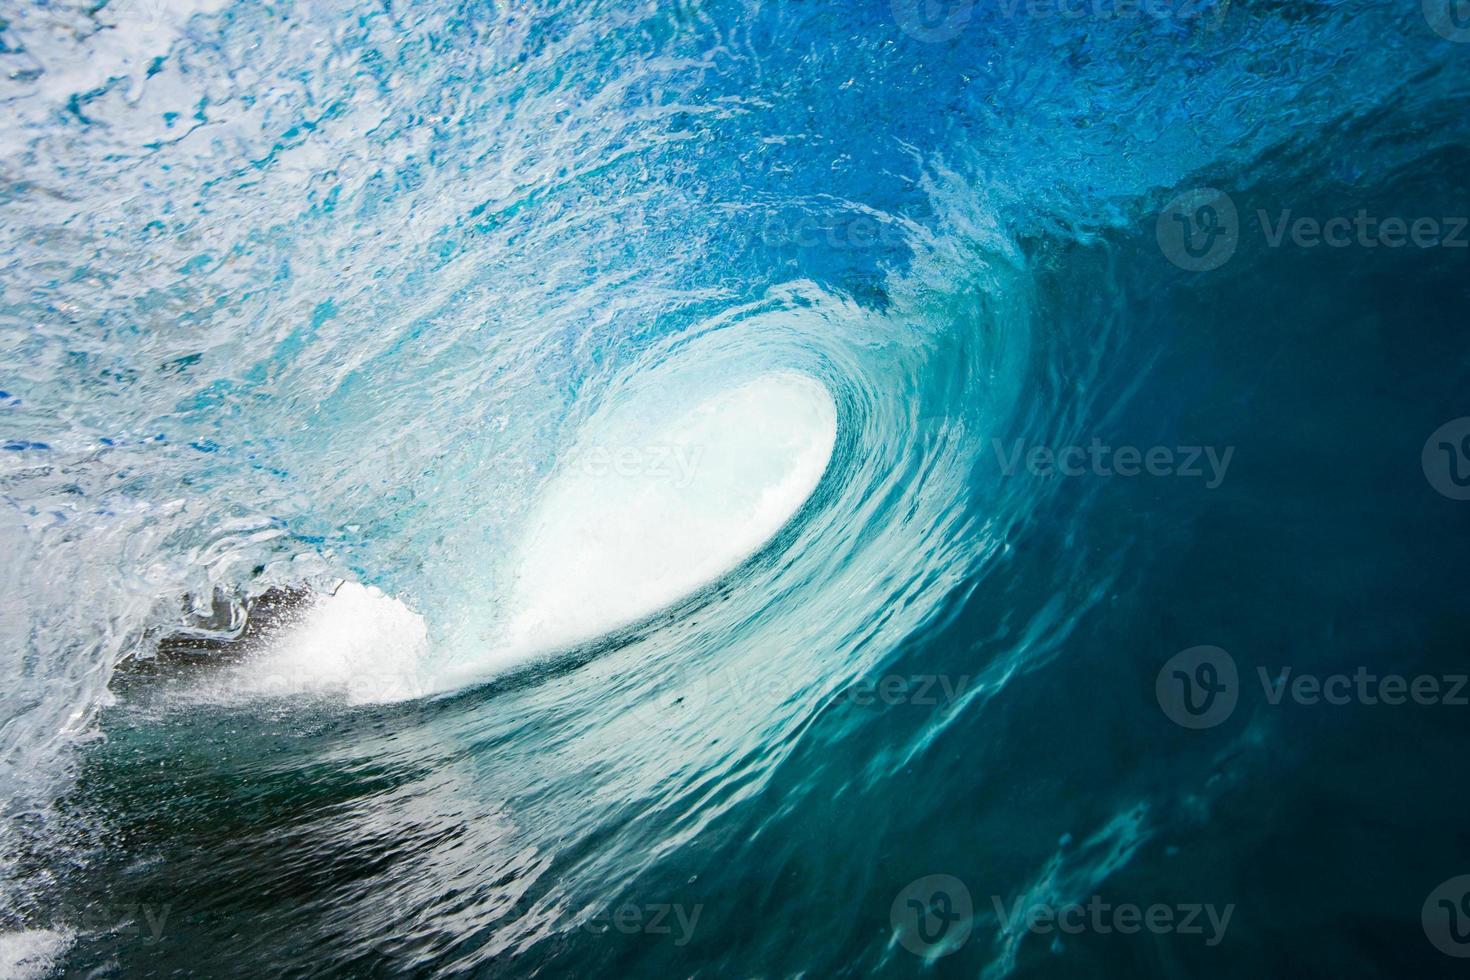 An interior view of a barrel wave in the ocean photo